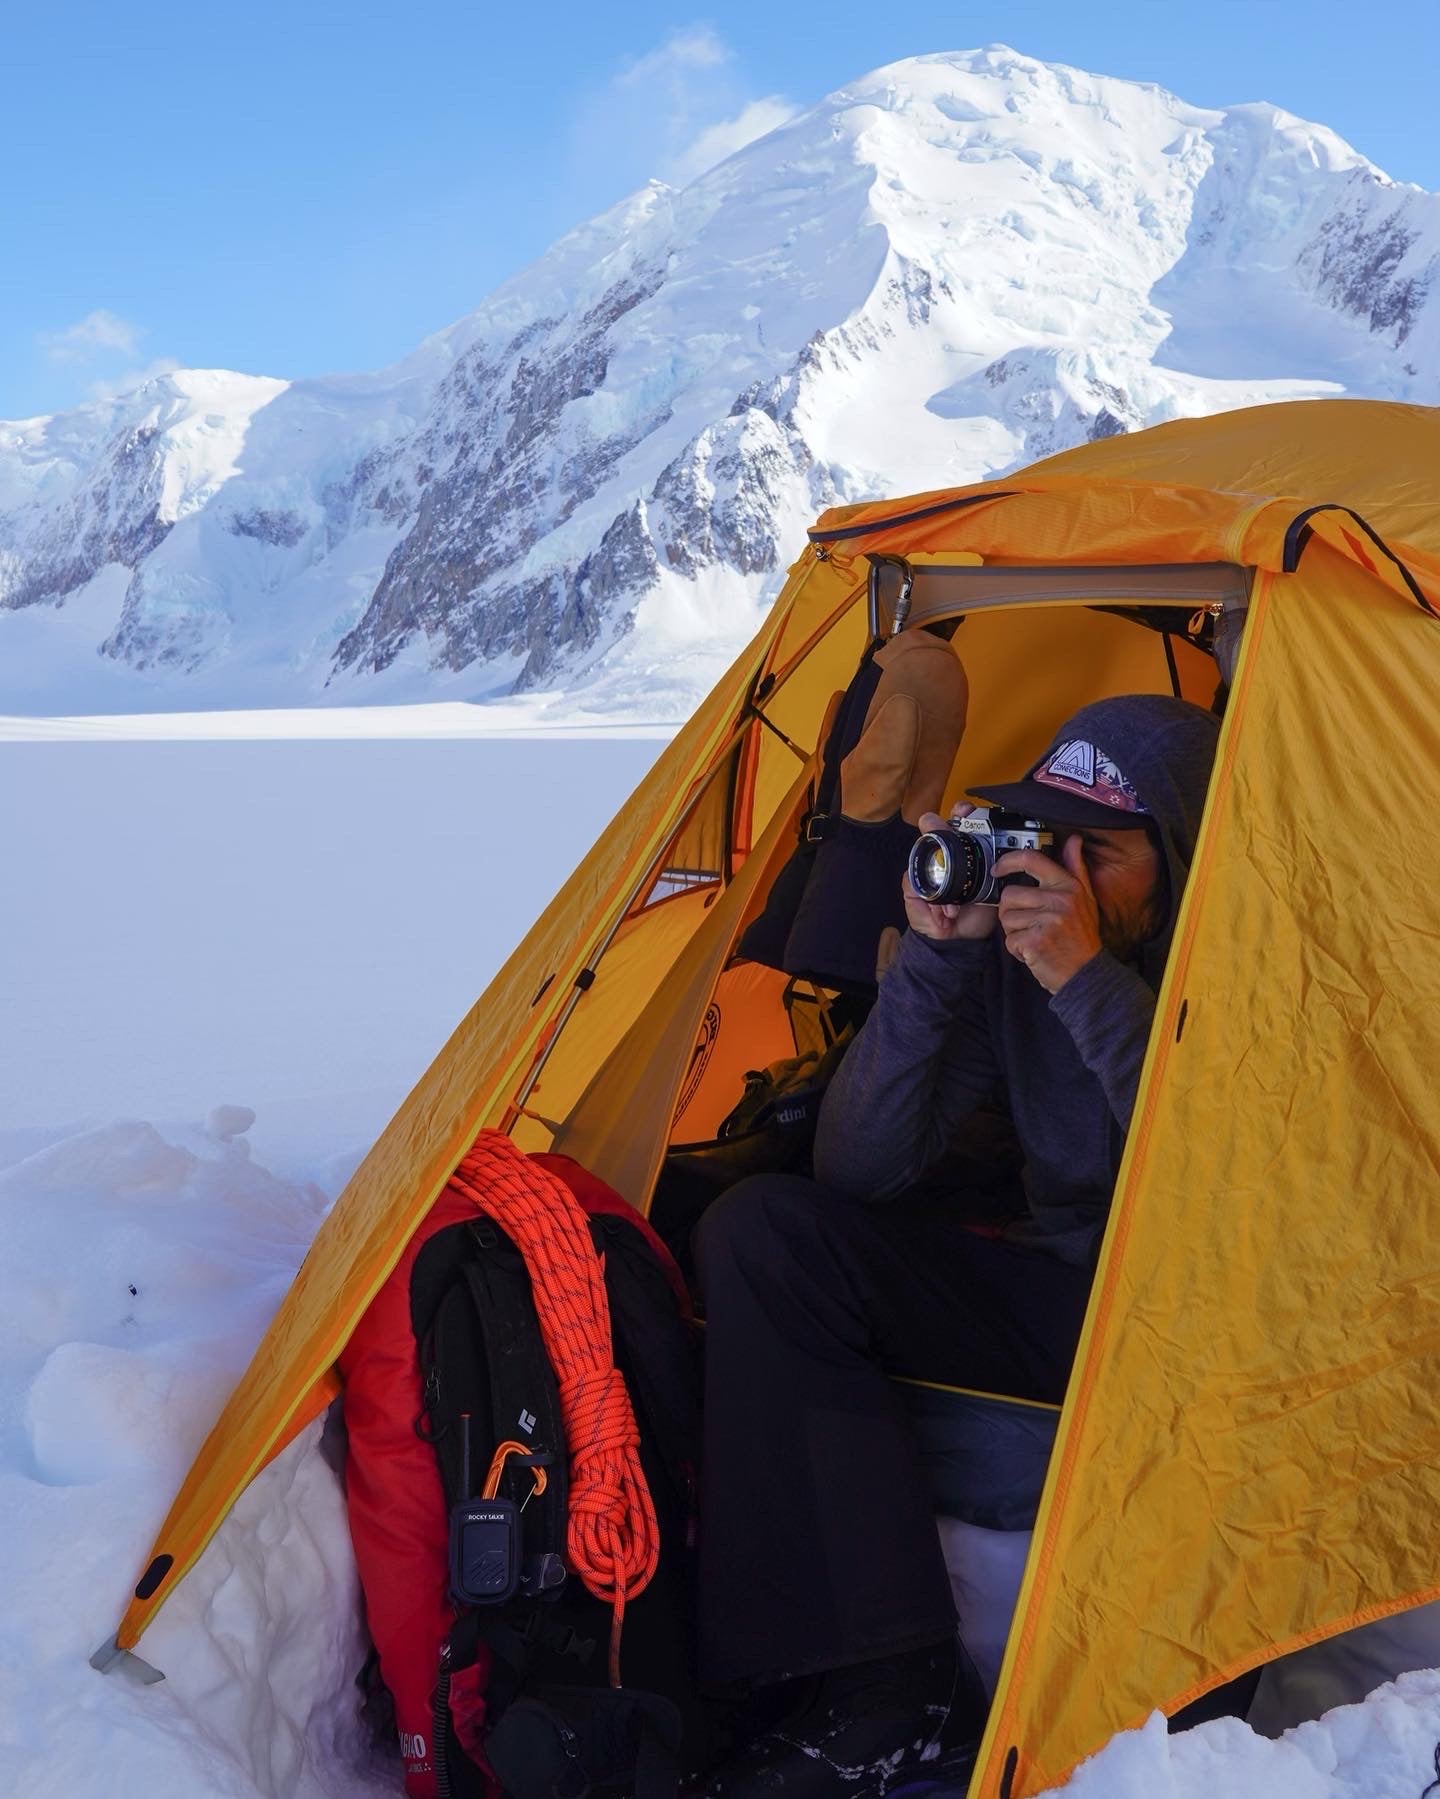 A man sits in the doorway of a yellow tent with a camera to his eye. A snow encrusted mountain peak looms in the background.